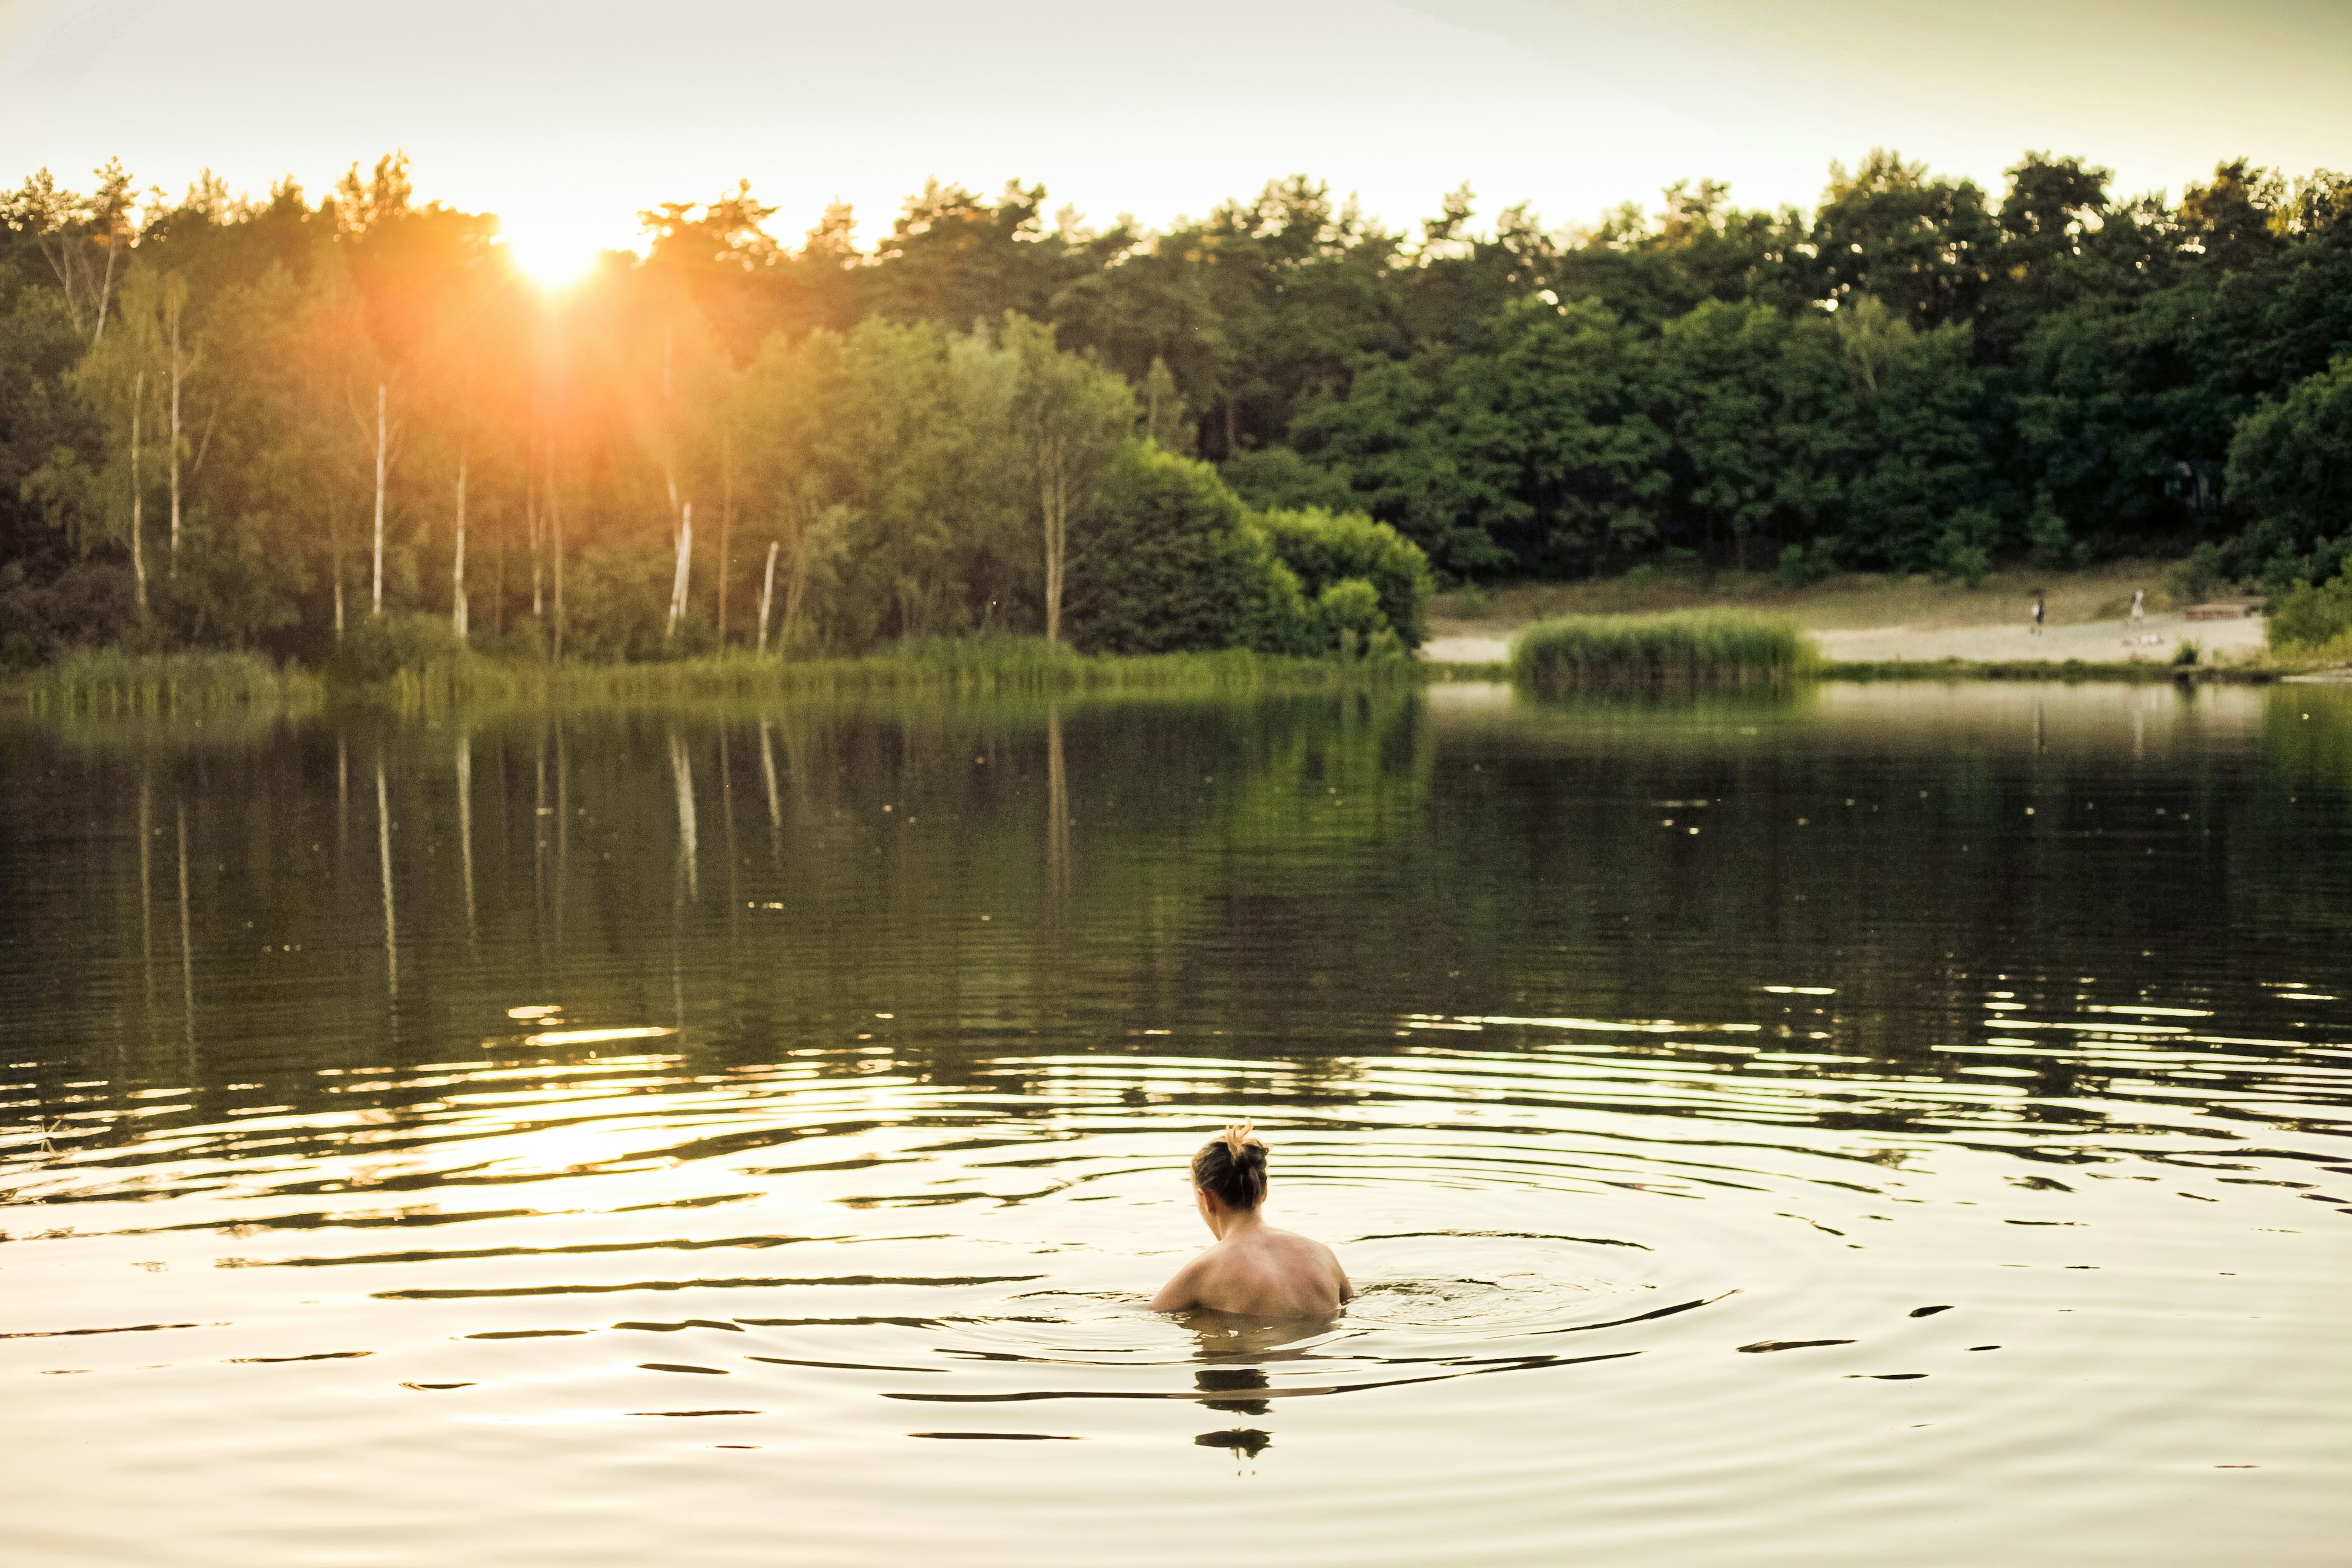 topless person in lake water near trees during daytime